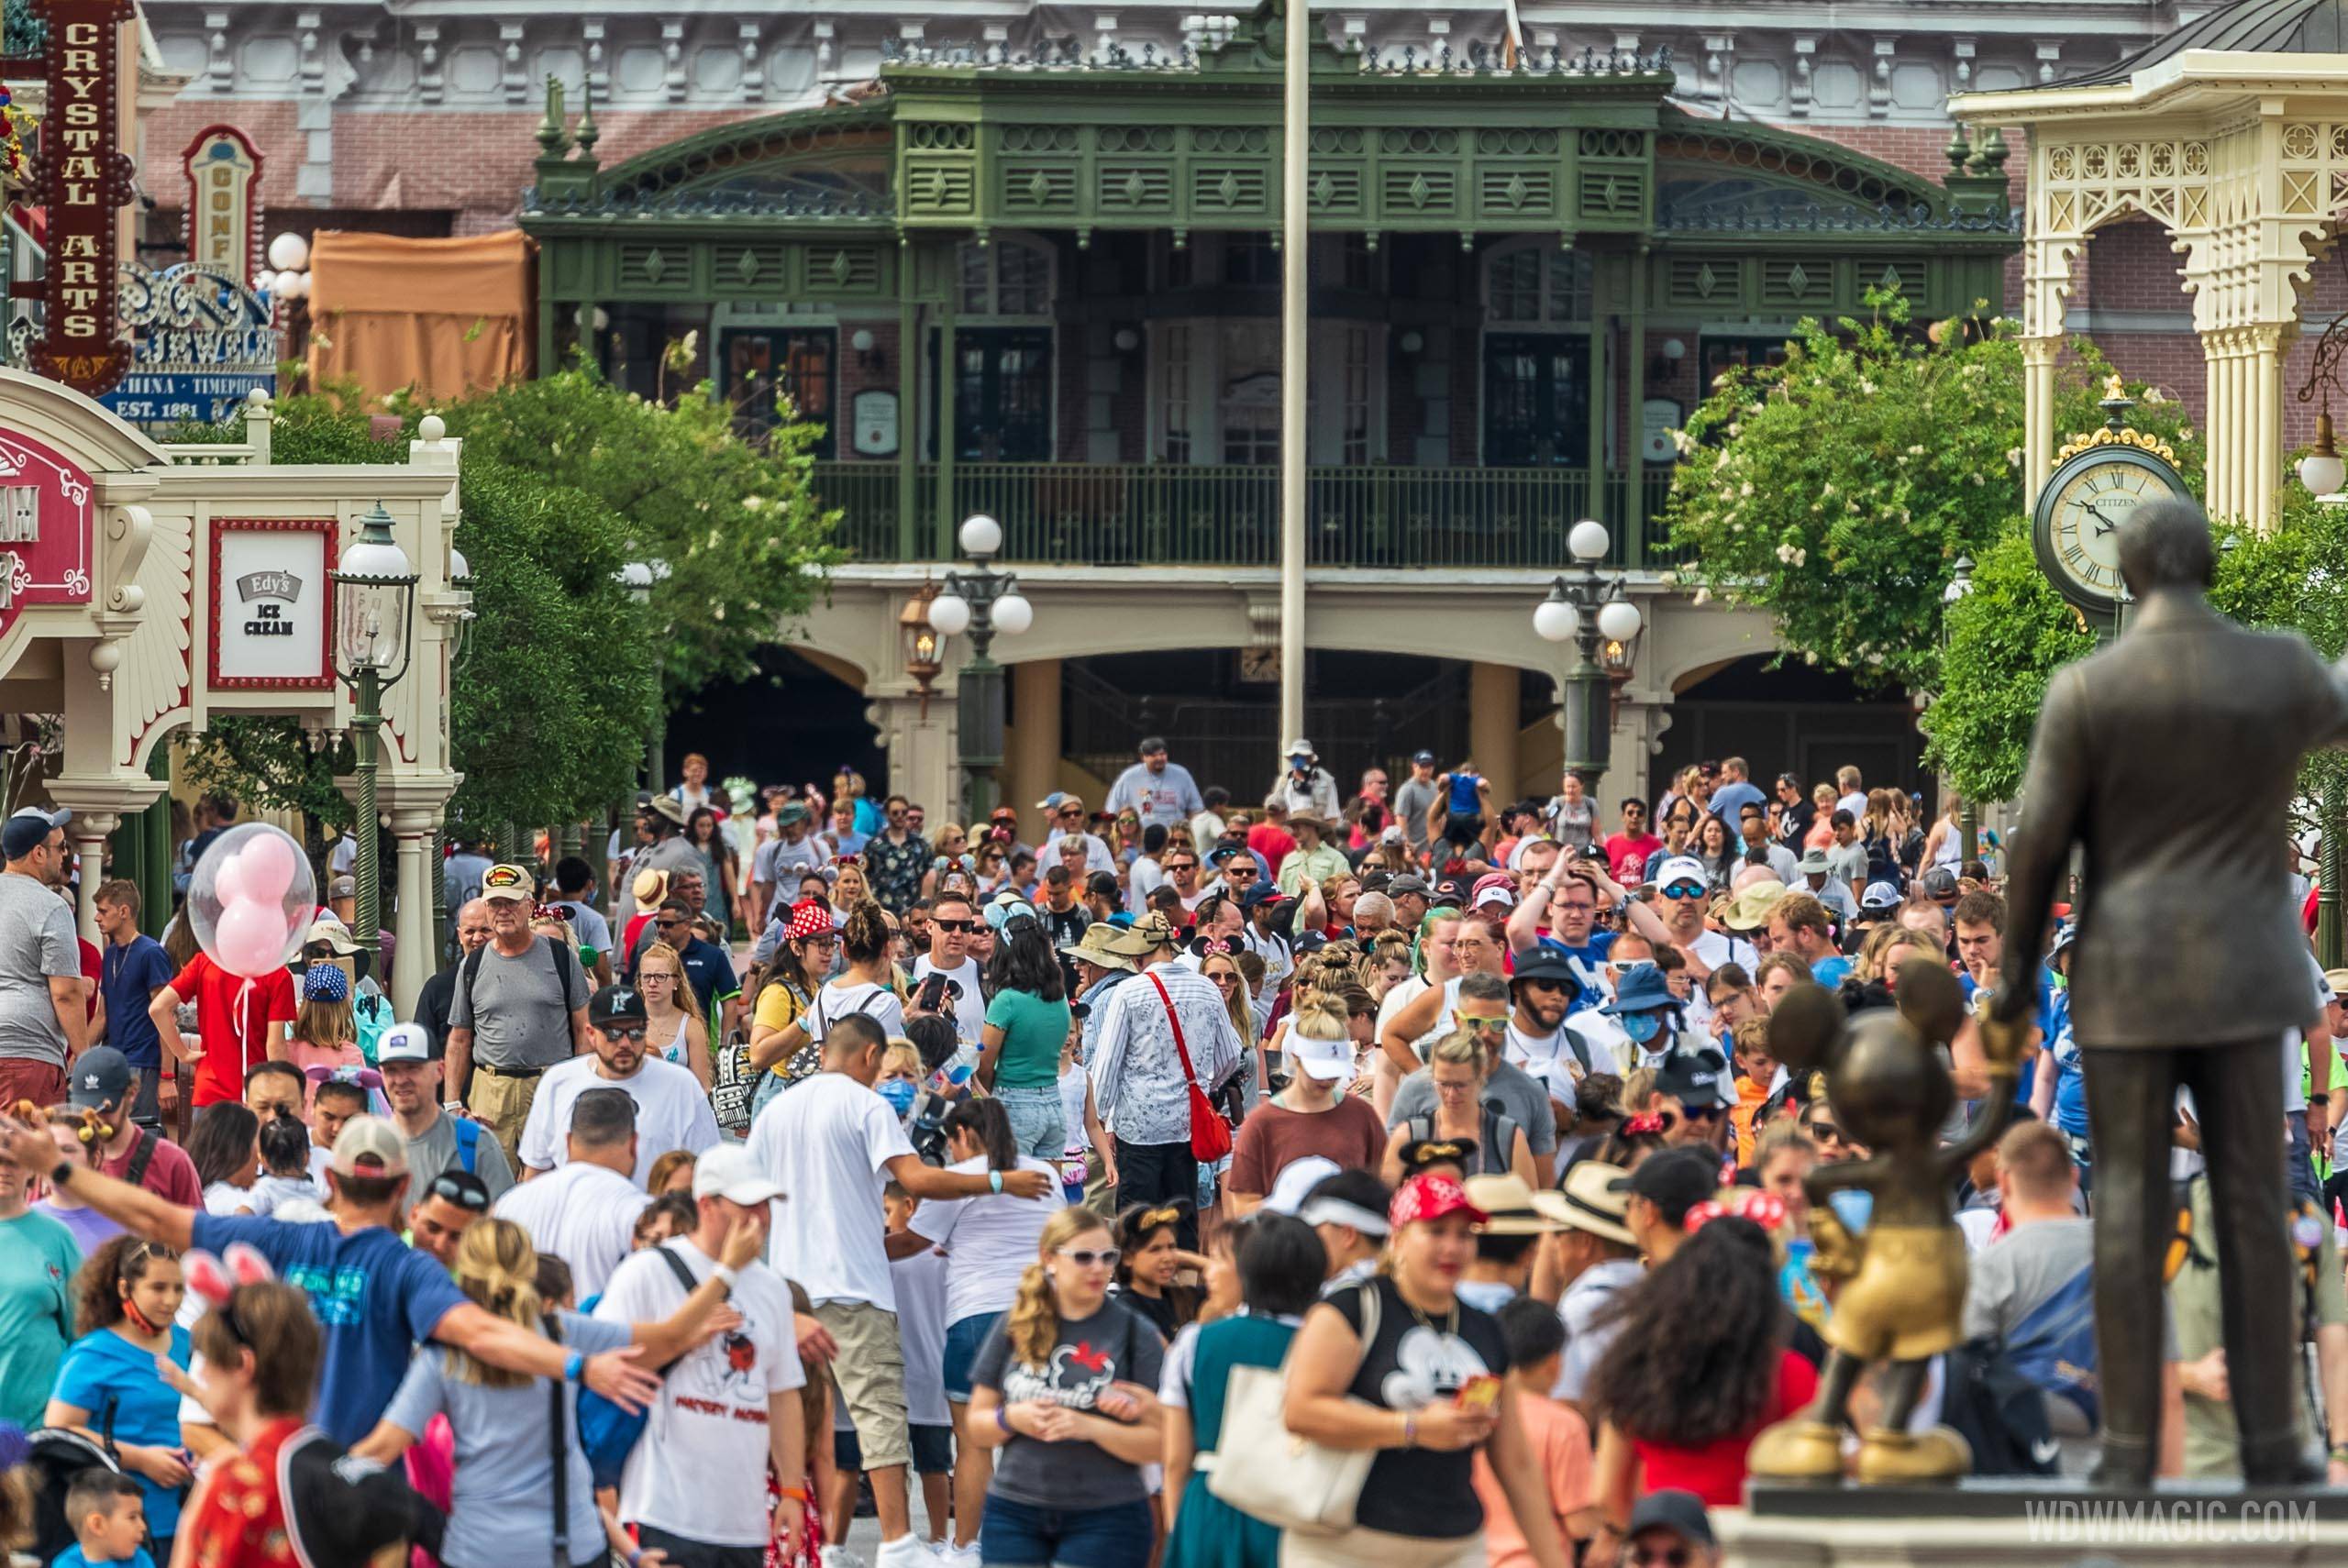 What has changed as Disney no longer requires masks to be worn and physical distancing is gone at the Walt Disney World theme parks